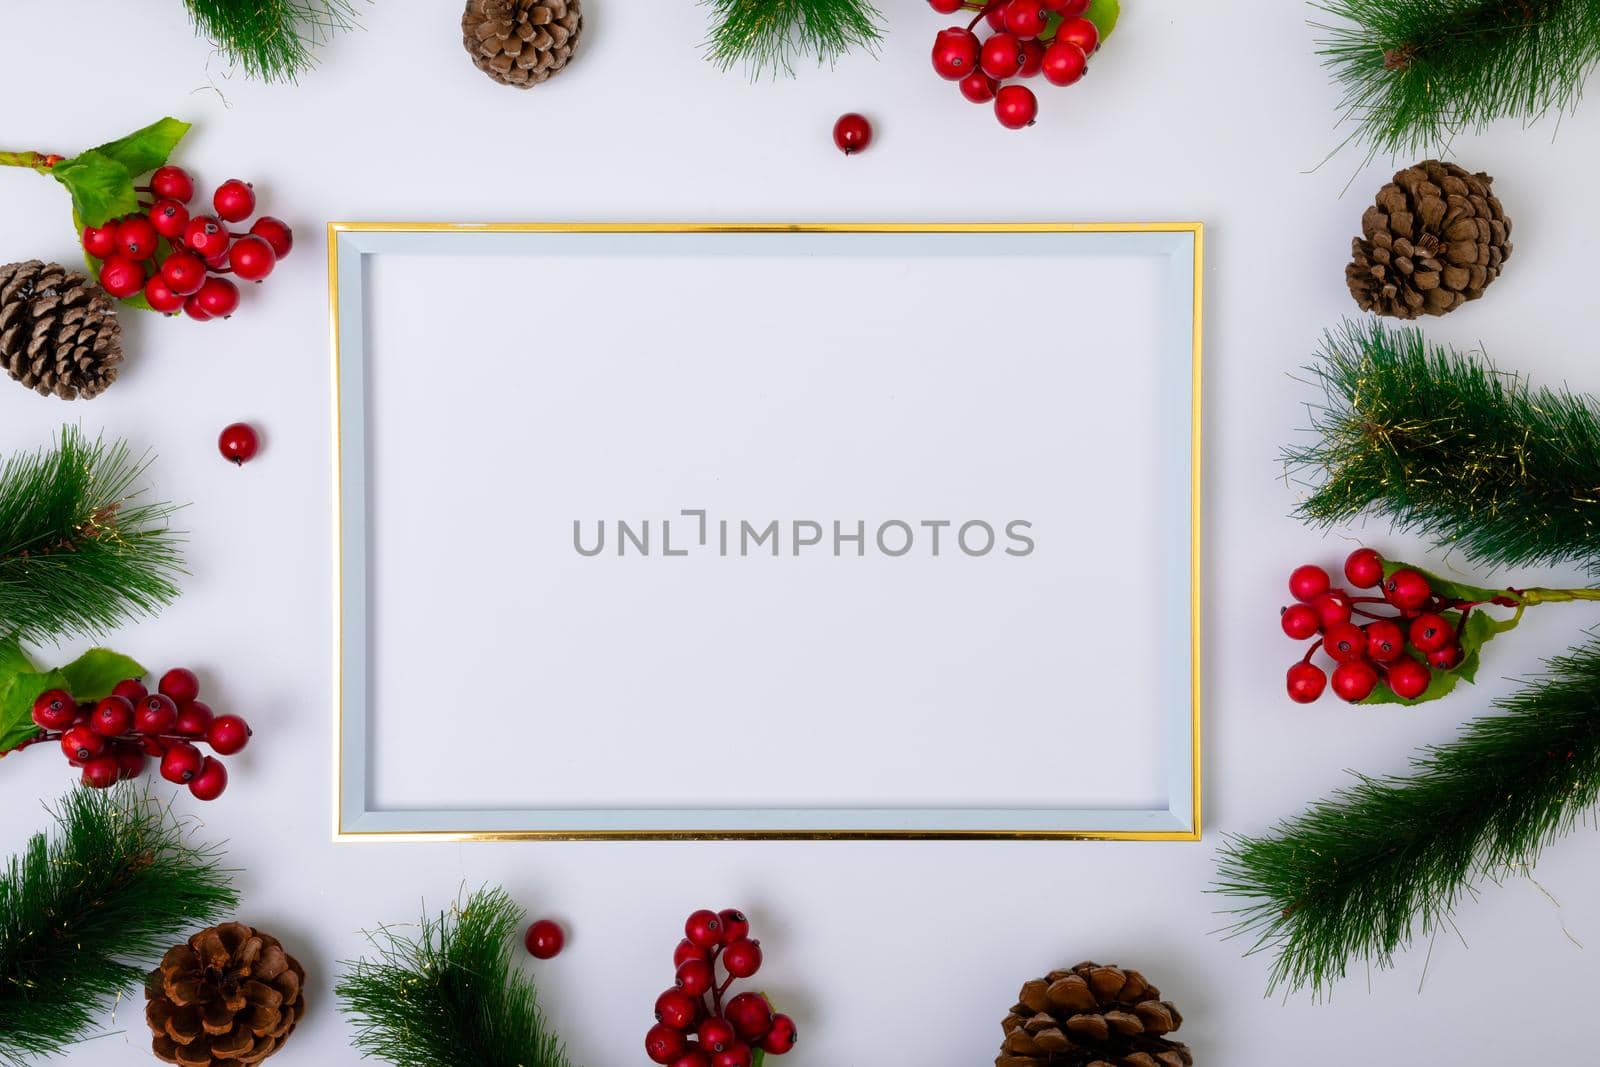 Composition of frame with copy space and fir tree branches with pine cones on white background by Wavebreakmedia